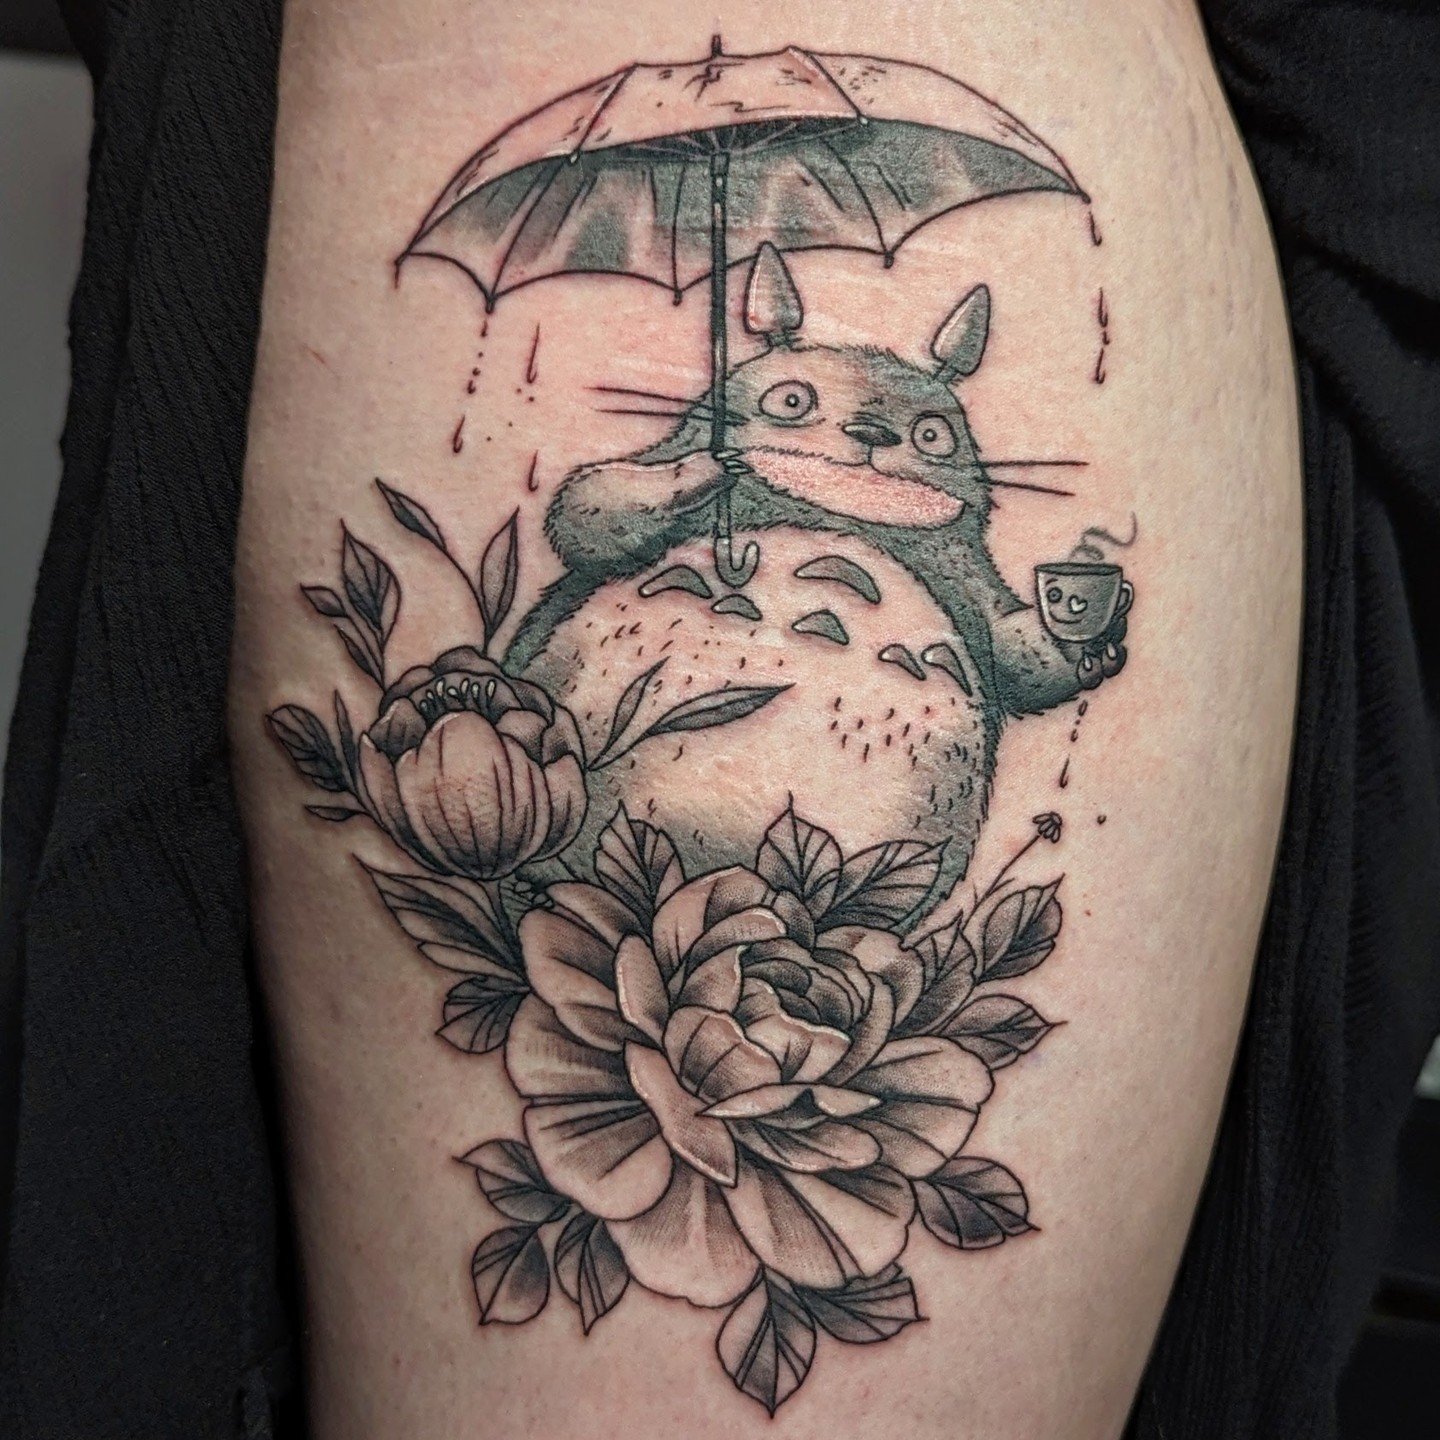 Totoro thigh piece from yesterday over scarring. The first one for the Two Arrows Project here at my shop. Thanks so much for the trust!!
.
To sign up head on over to our website 🙂 www.jordietattooer.com
.
.
Two Arrows is a non-profit project starte